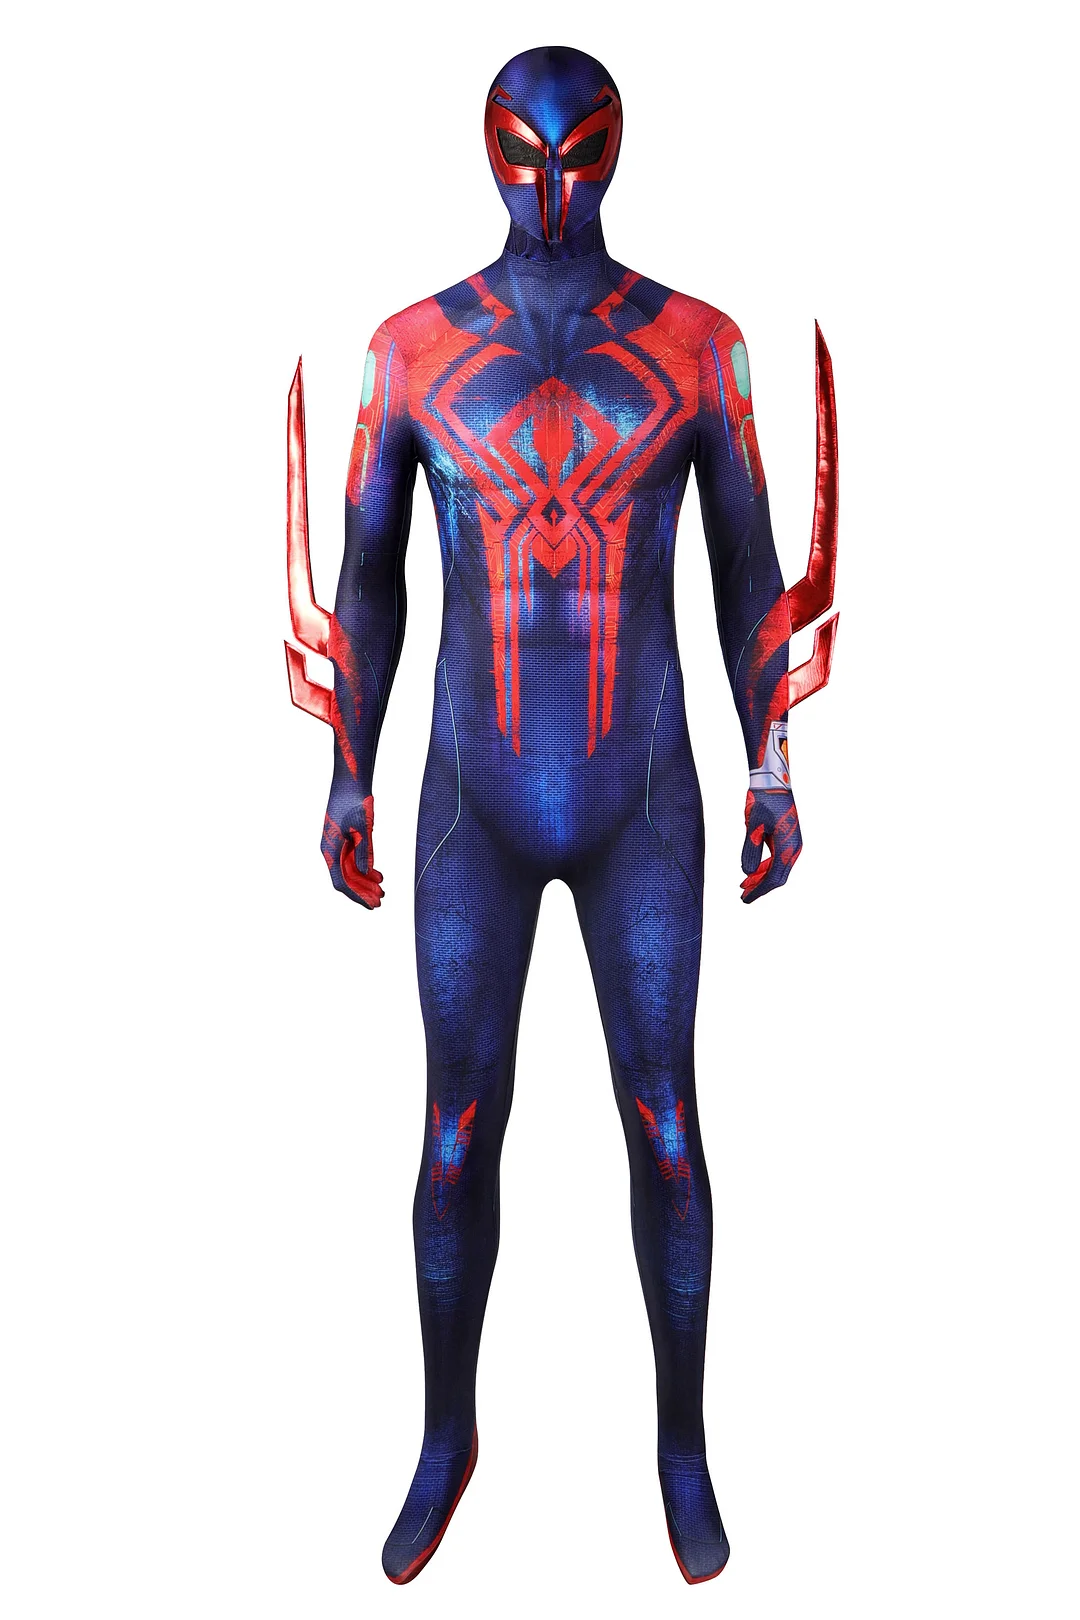 Spiderman 2099 Across The Spider-Verse Costume Miguel O'Hara Cosplay New Suit for Adults